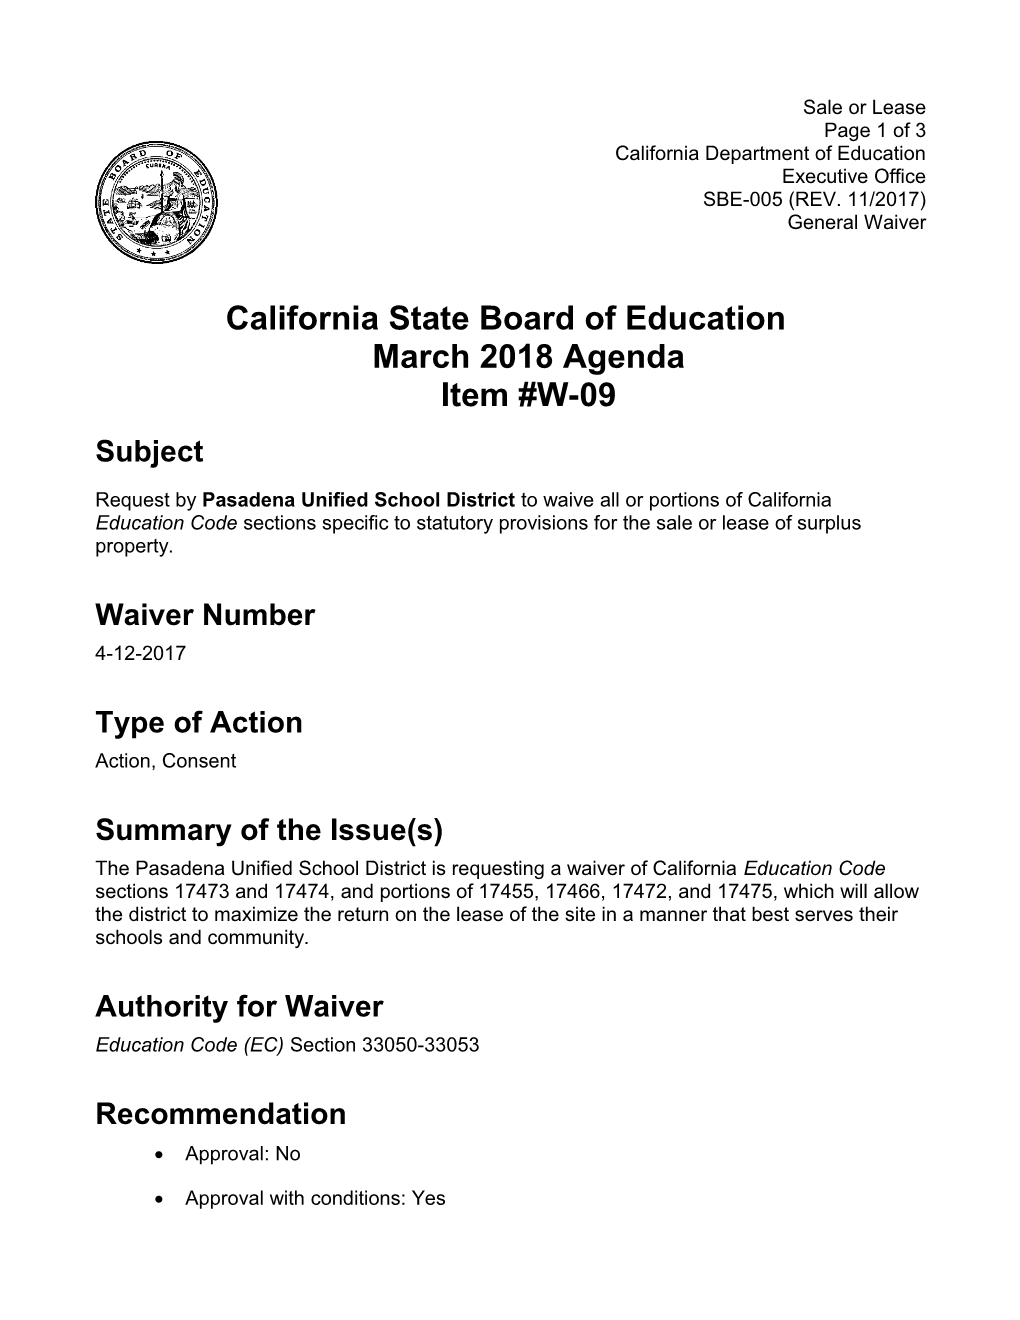 March 2018 Waiver Item W-09 - Meeting Agendas (CA State Board of Education)